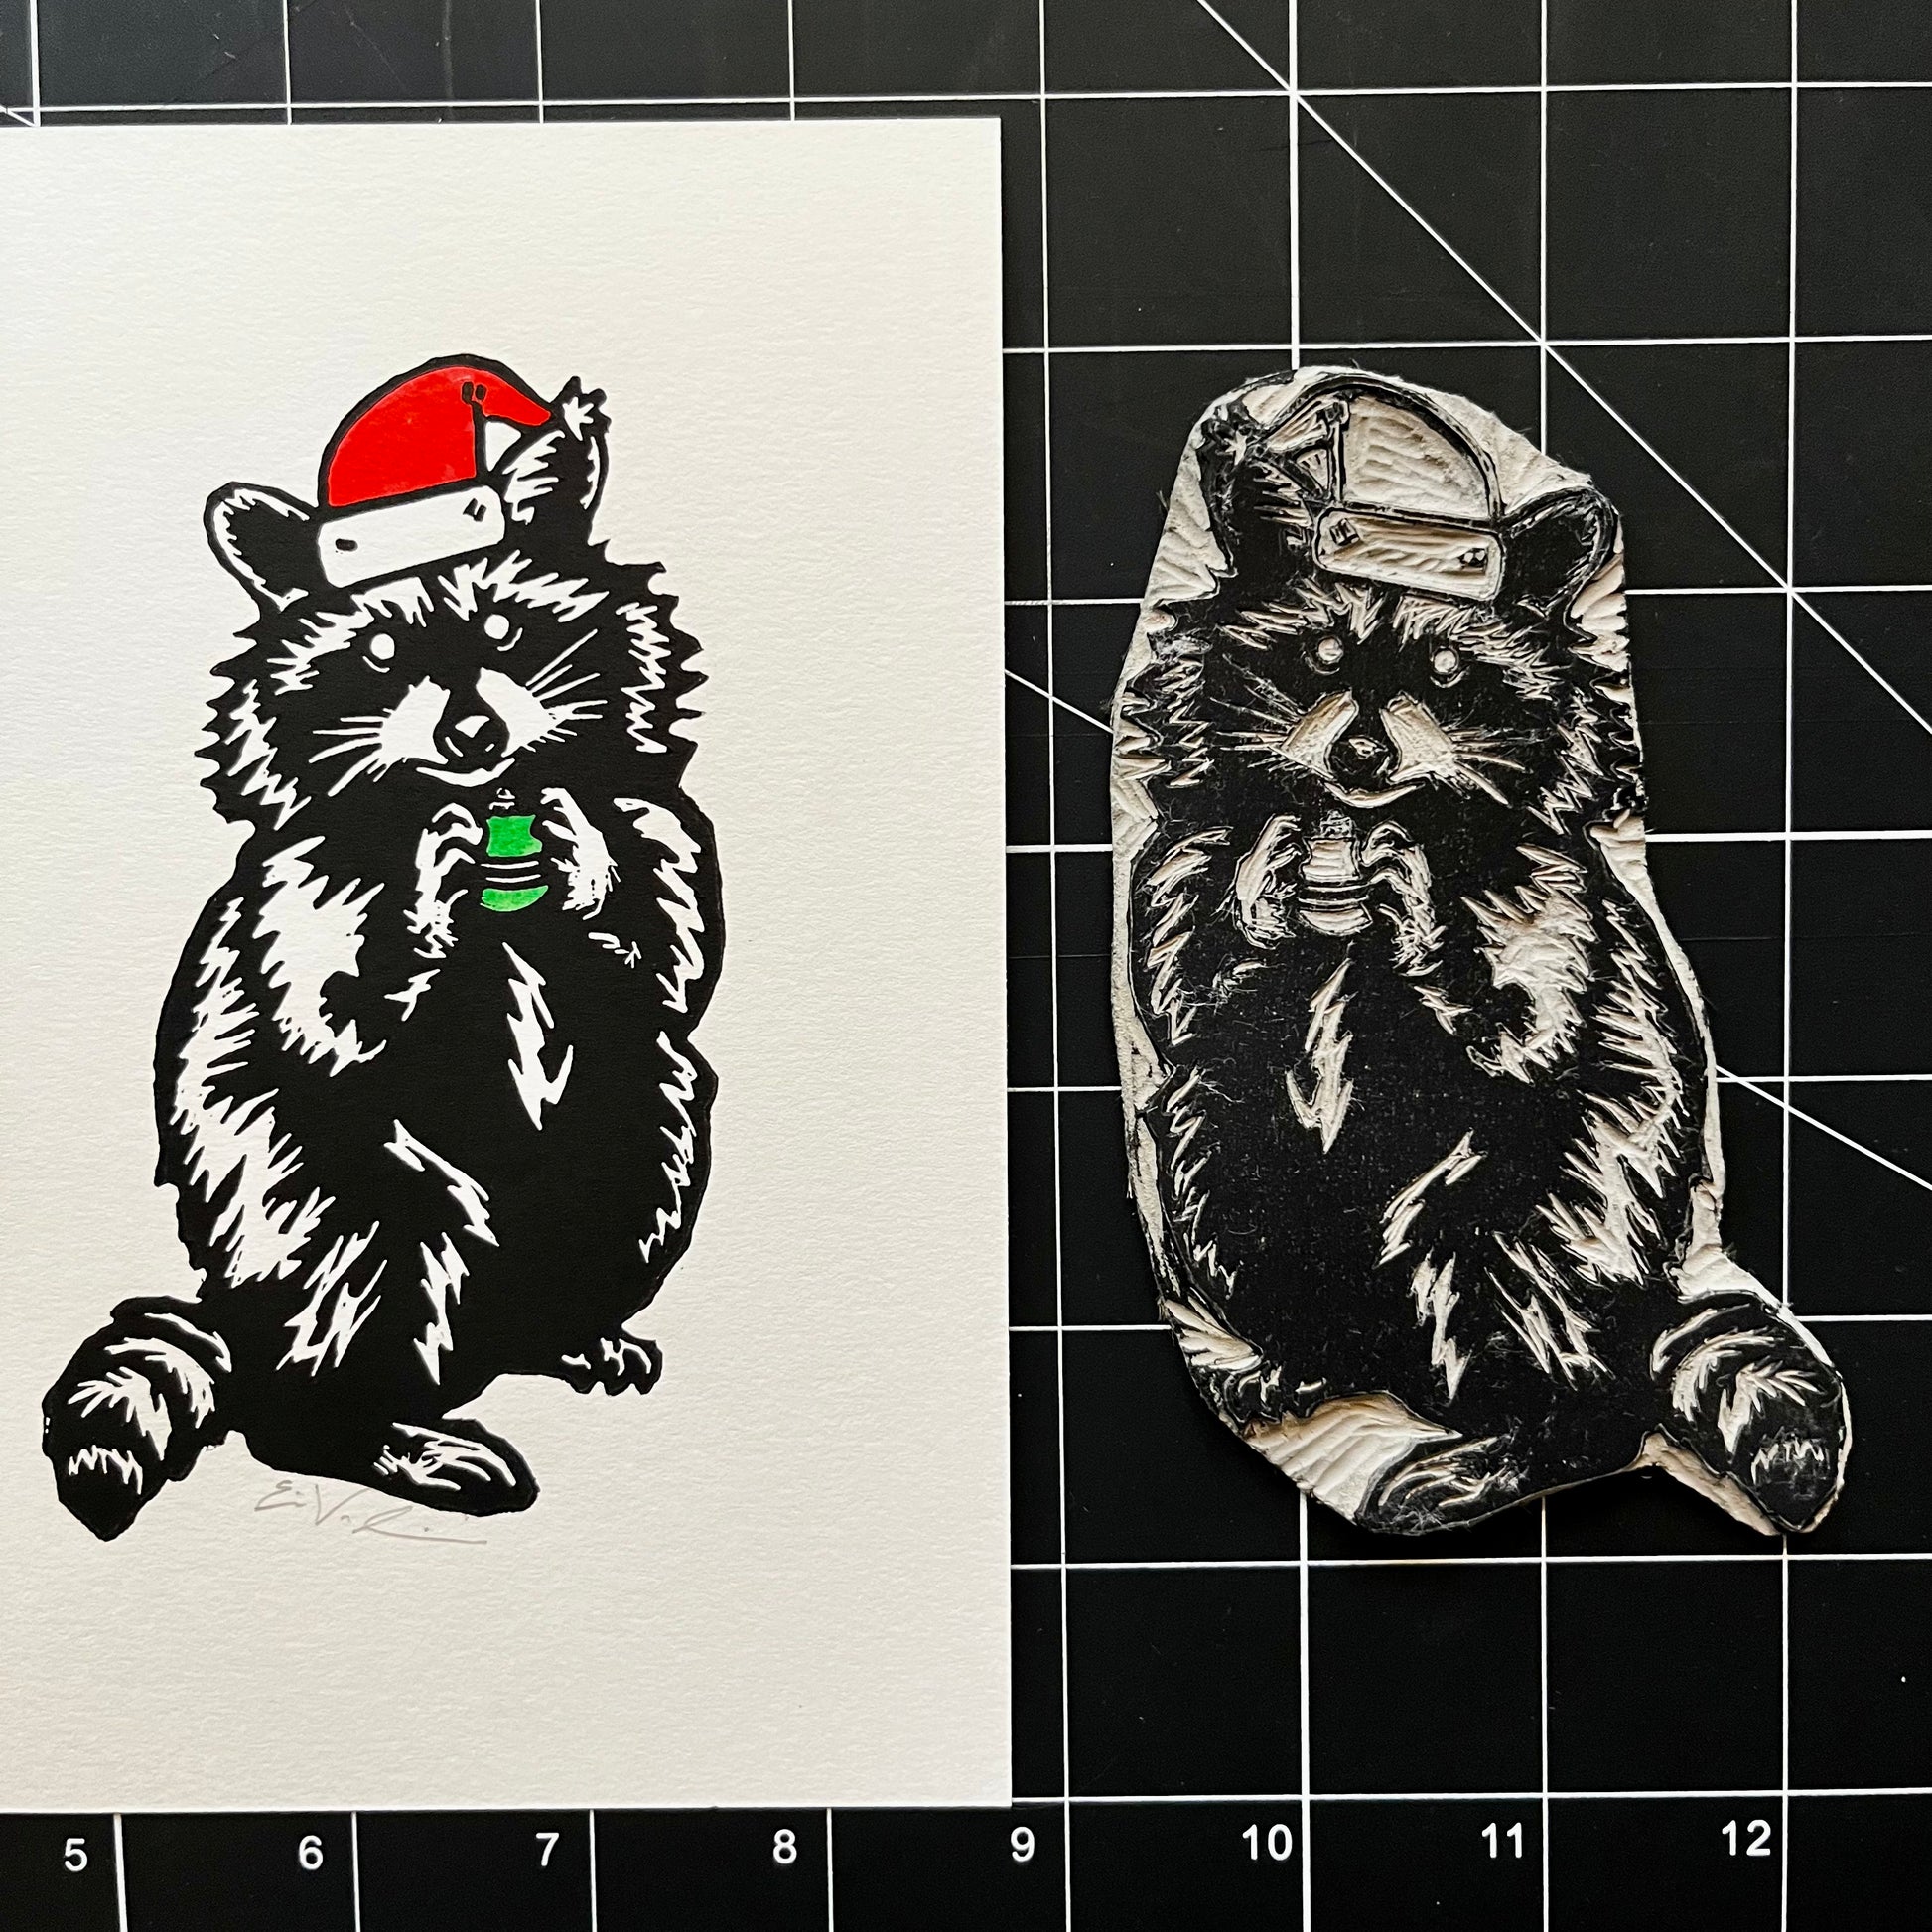 Pascal the Holiday Racoon | Greeting Card | LINOCUT CARD Queero Gear